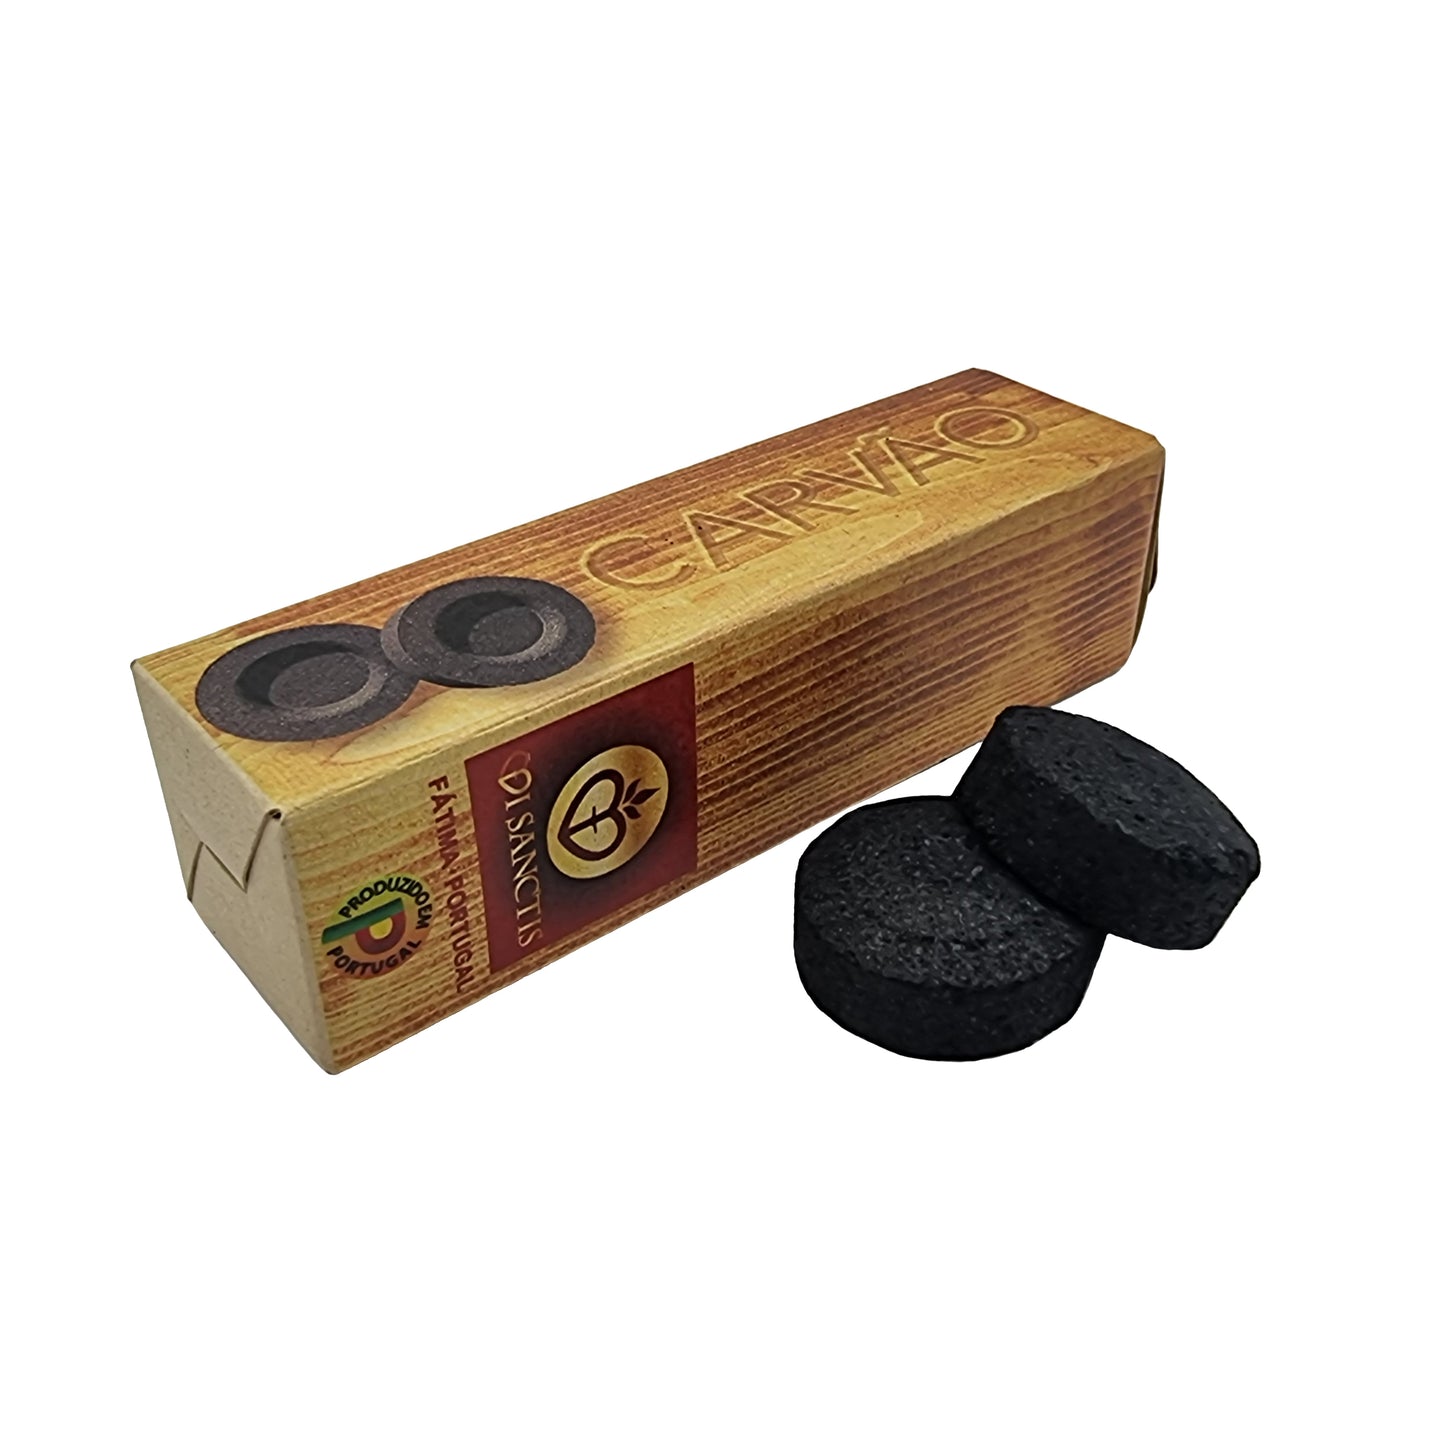 Charcoal – Carvao, 10 Tablets (Use For Burning Incense)